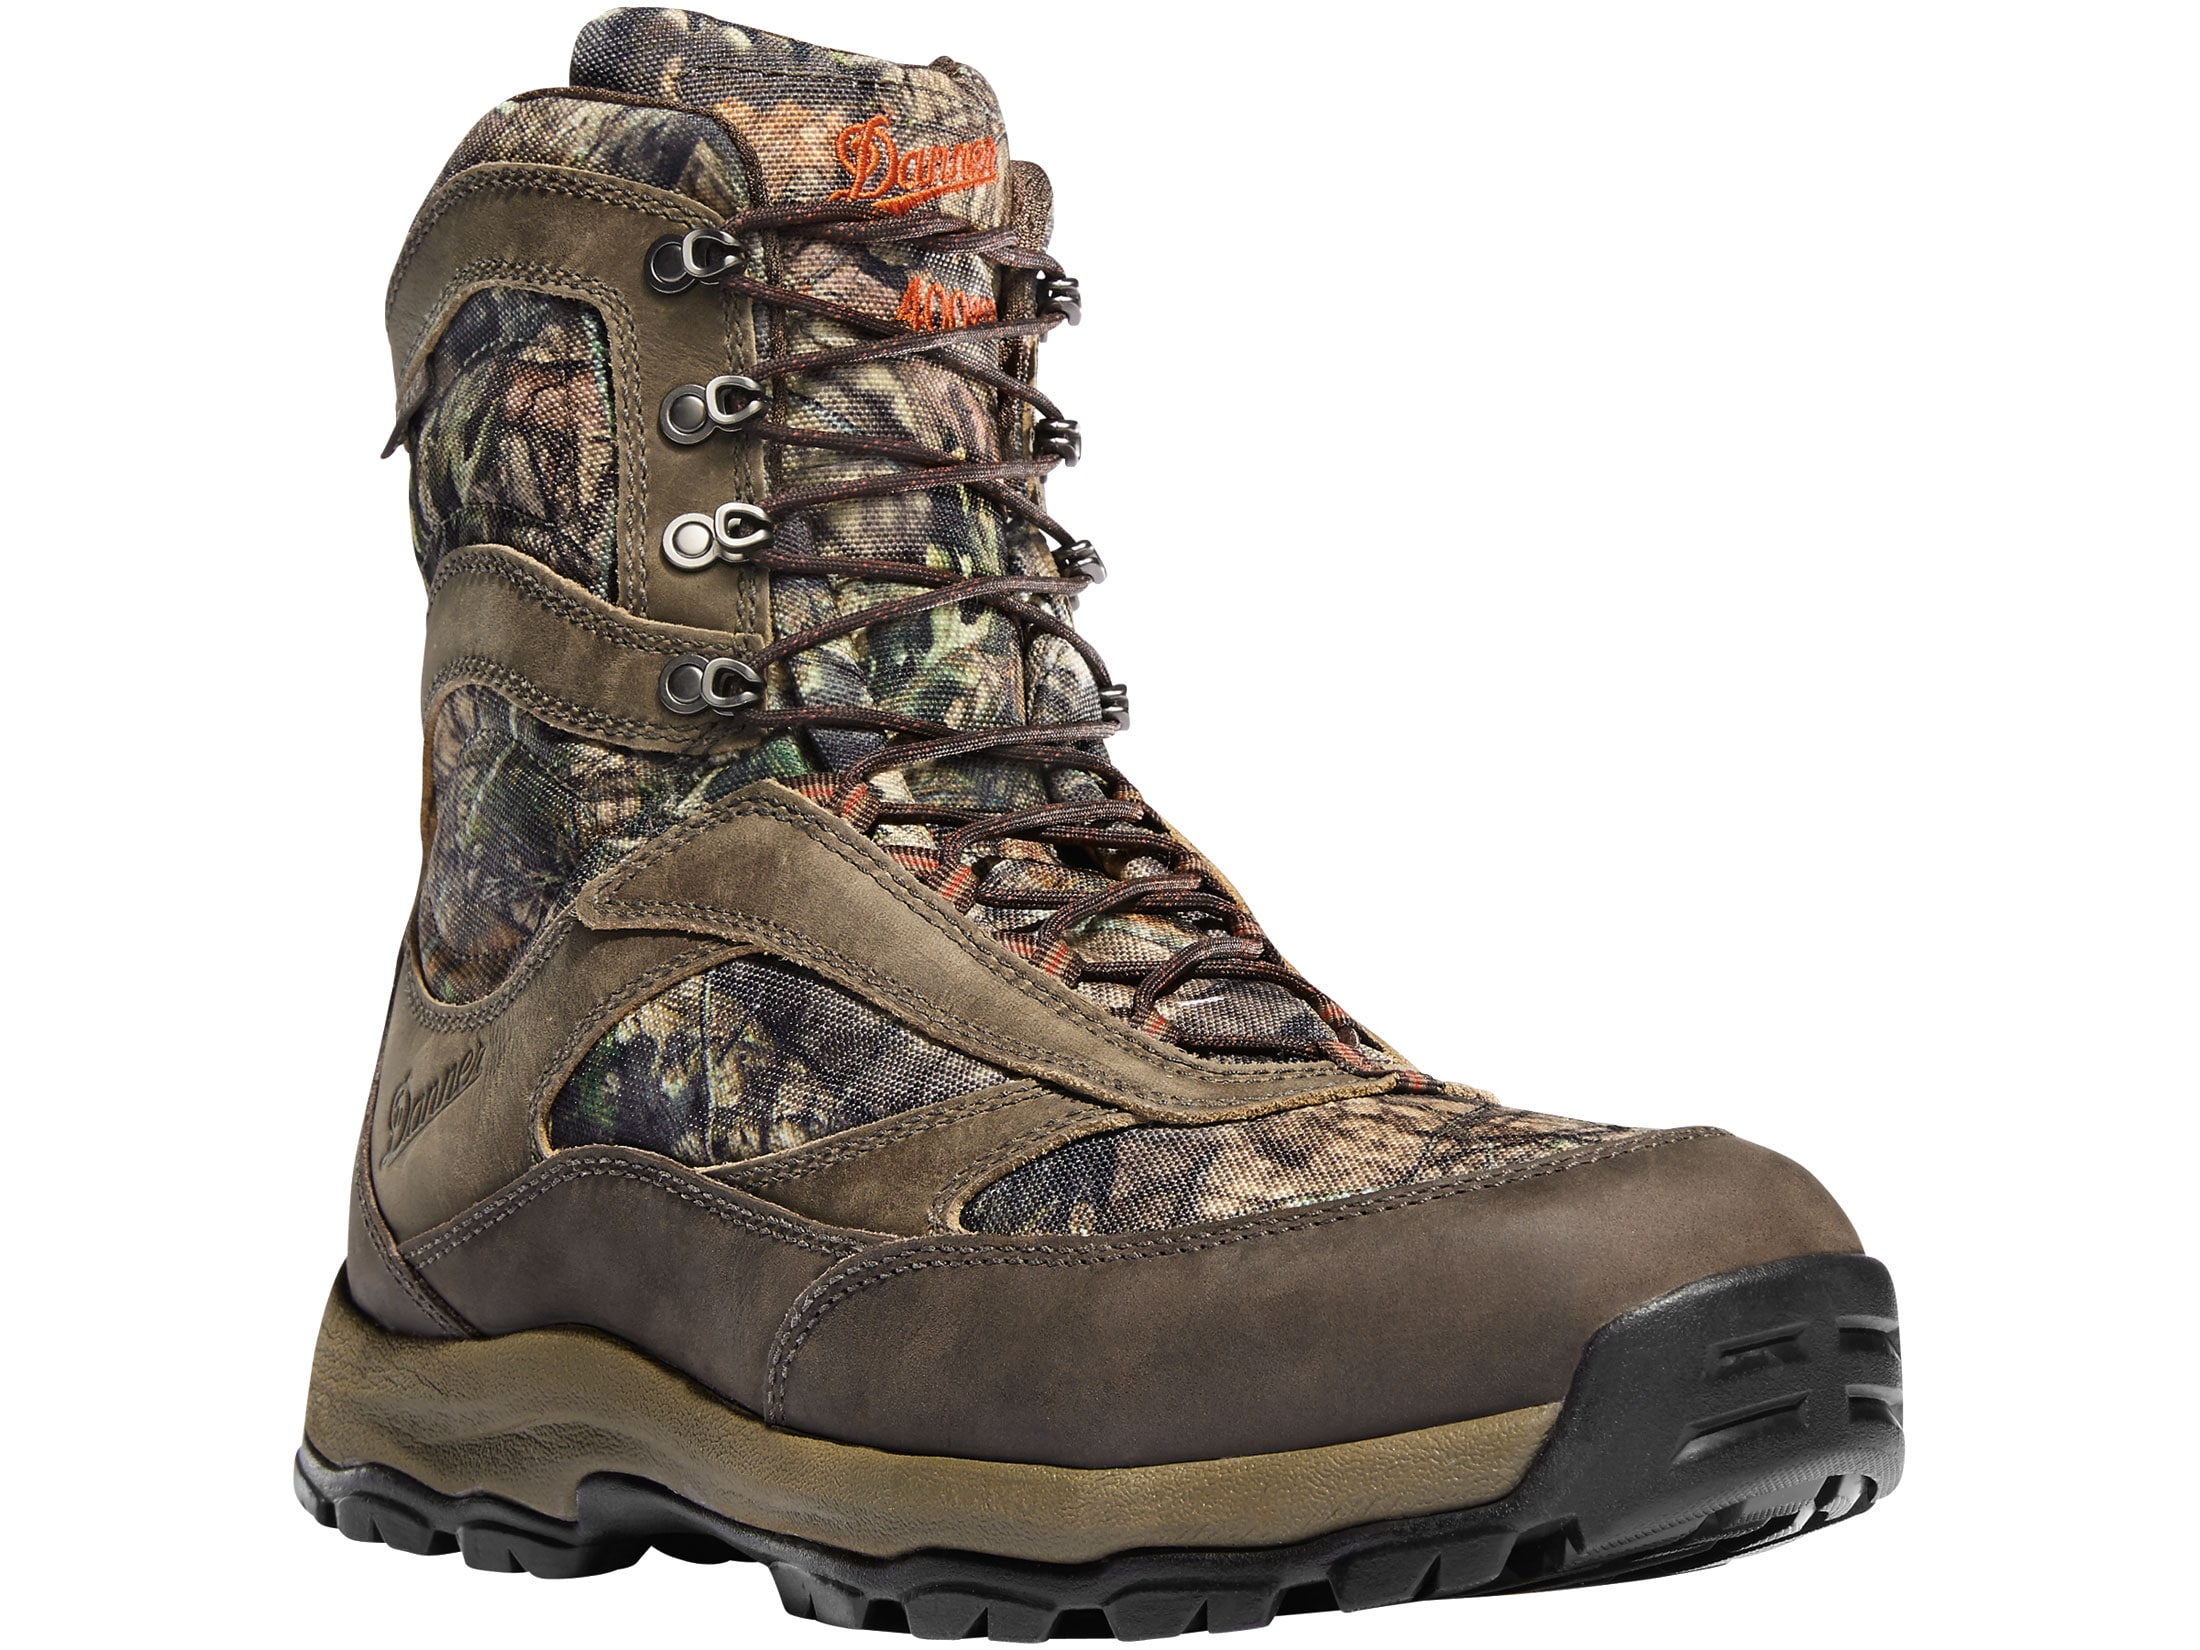 Danner High Ground 8 400 Gram Insulated Waterproof Hunting Boots